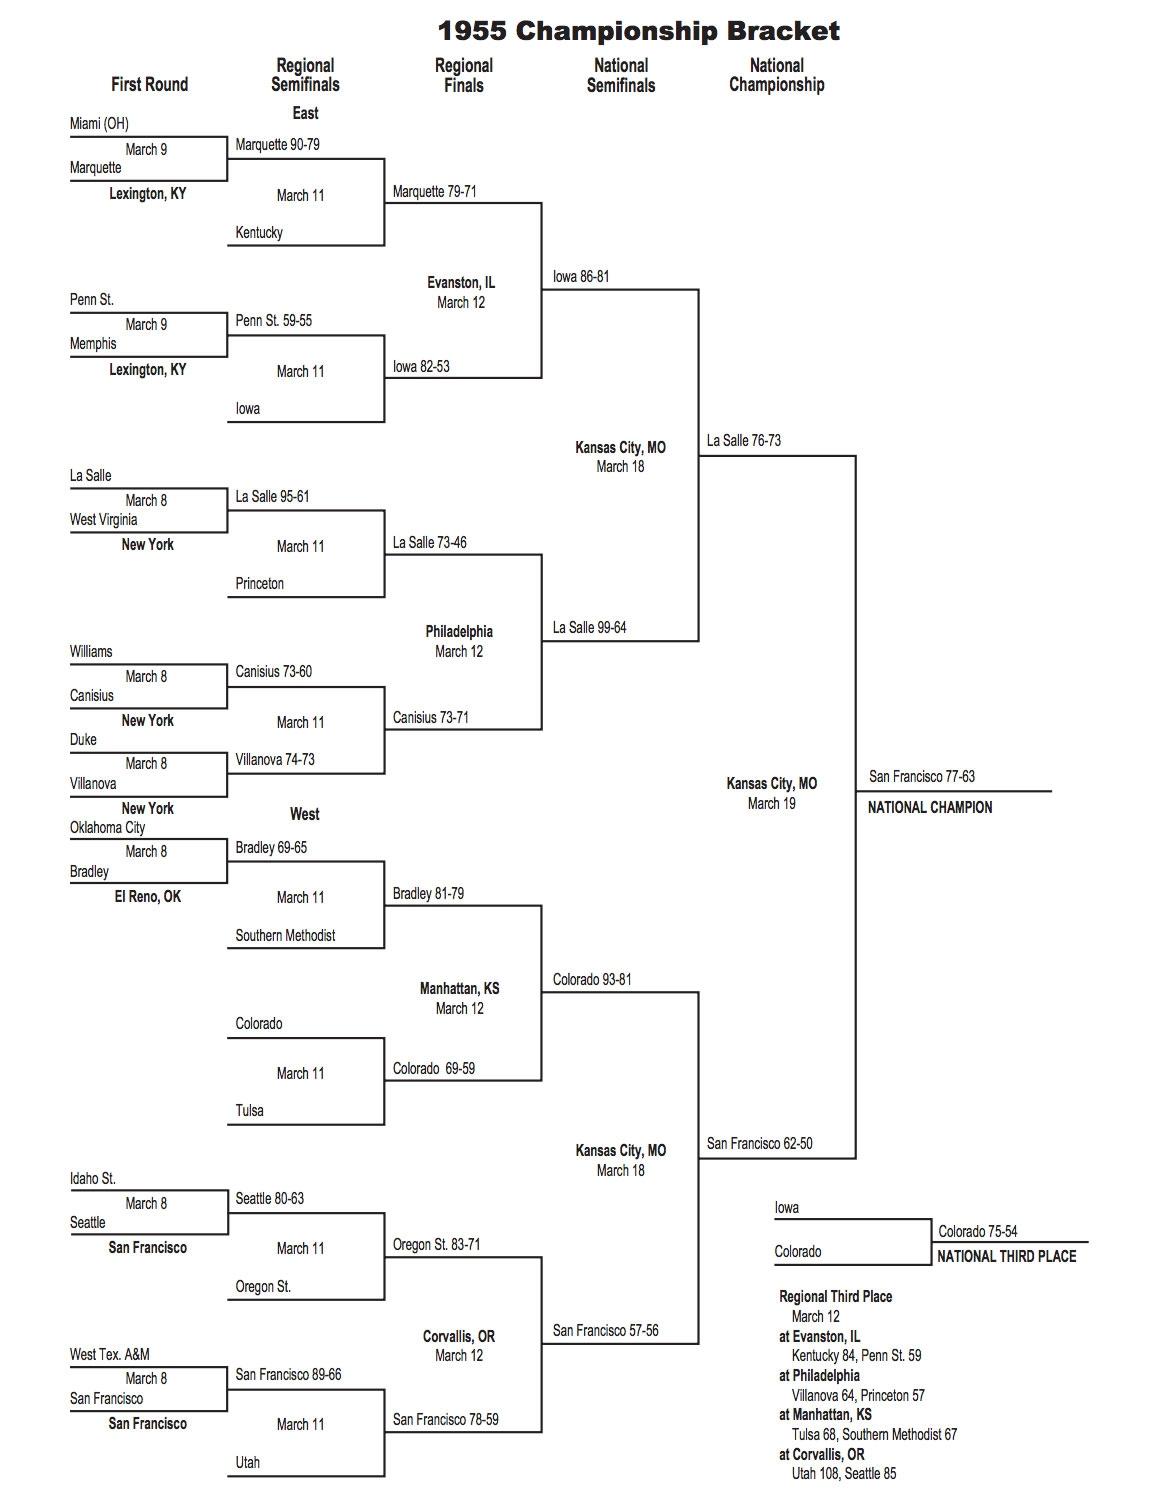 This is the 1955 NCAA tournament bracket.